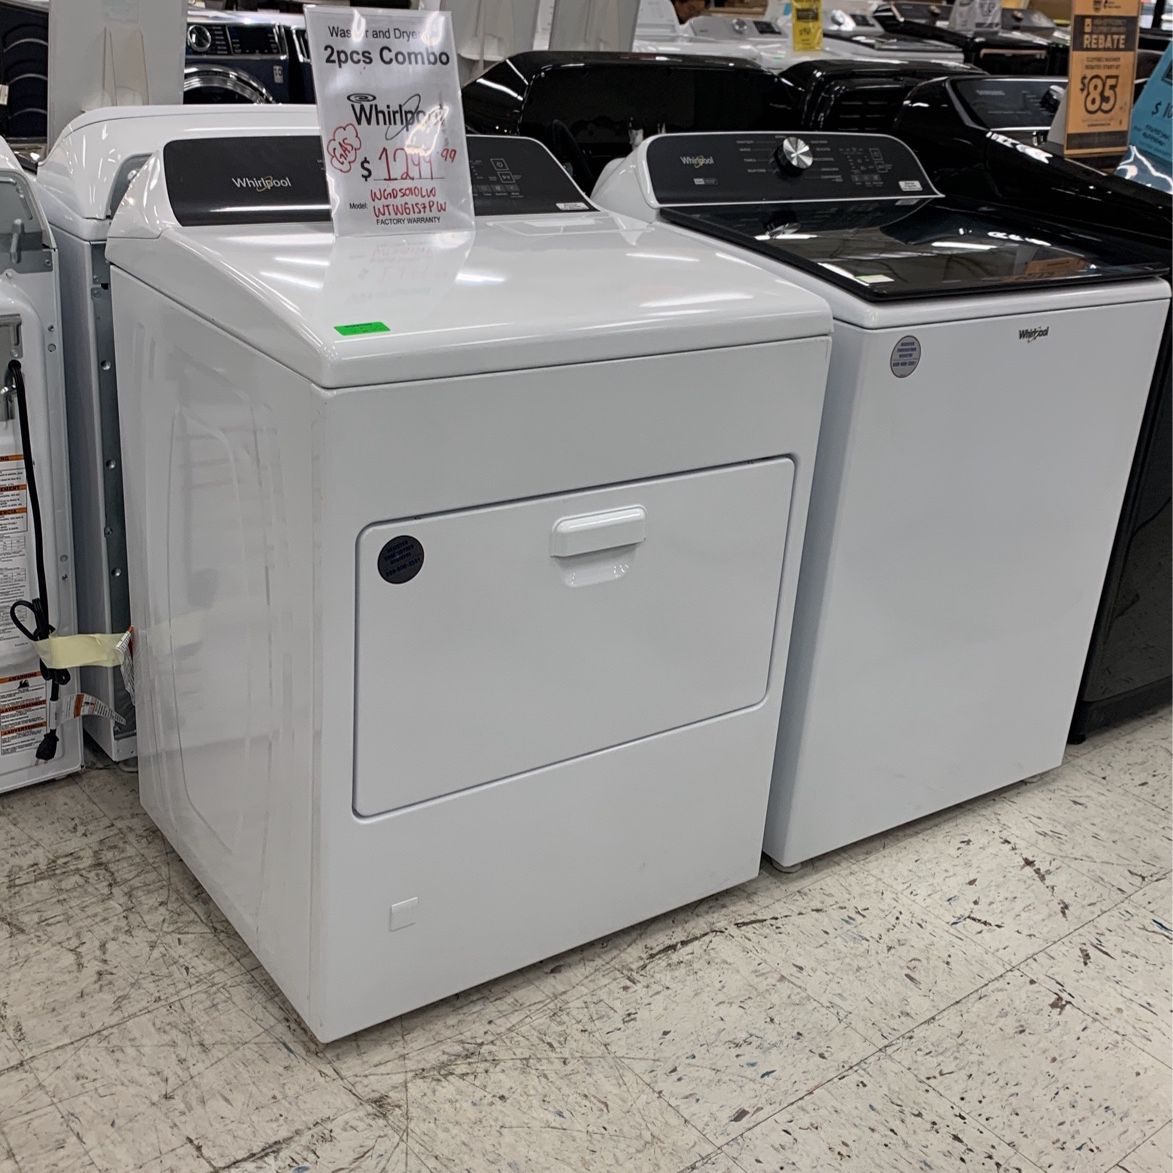 Gas Washer And Dryer Whirlpool Set 